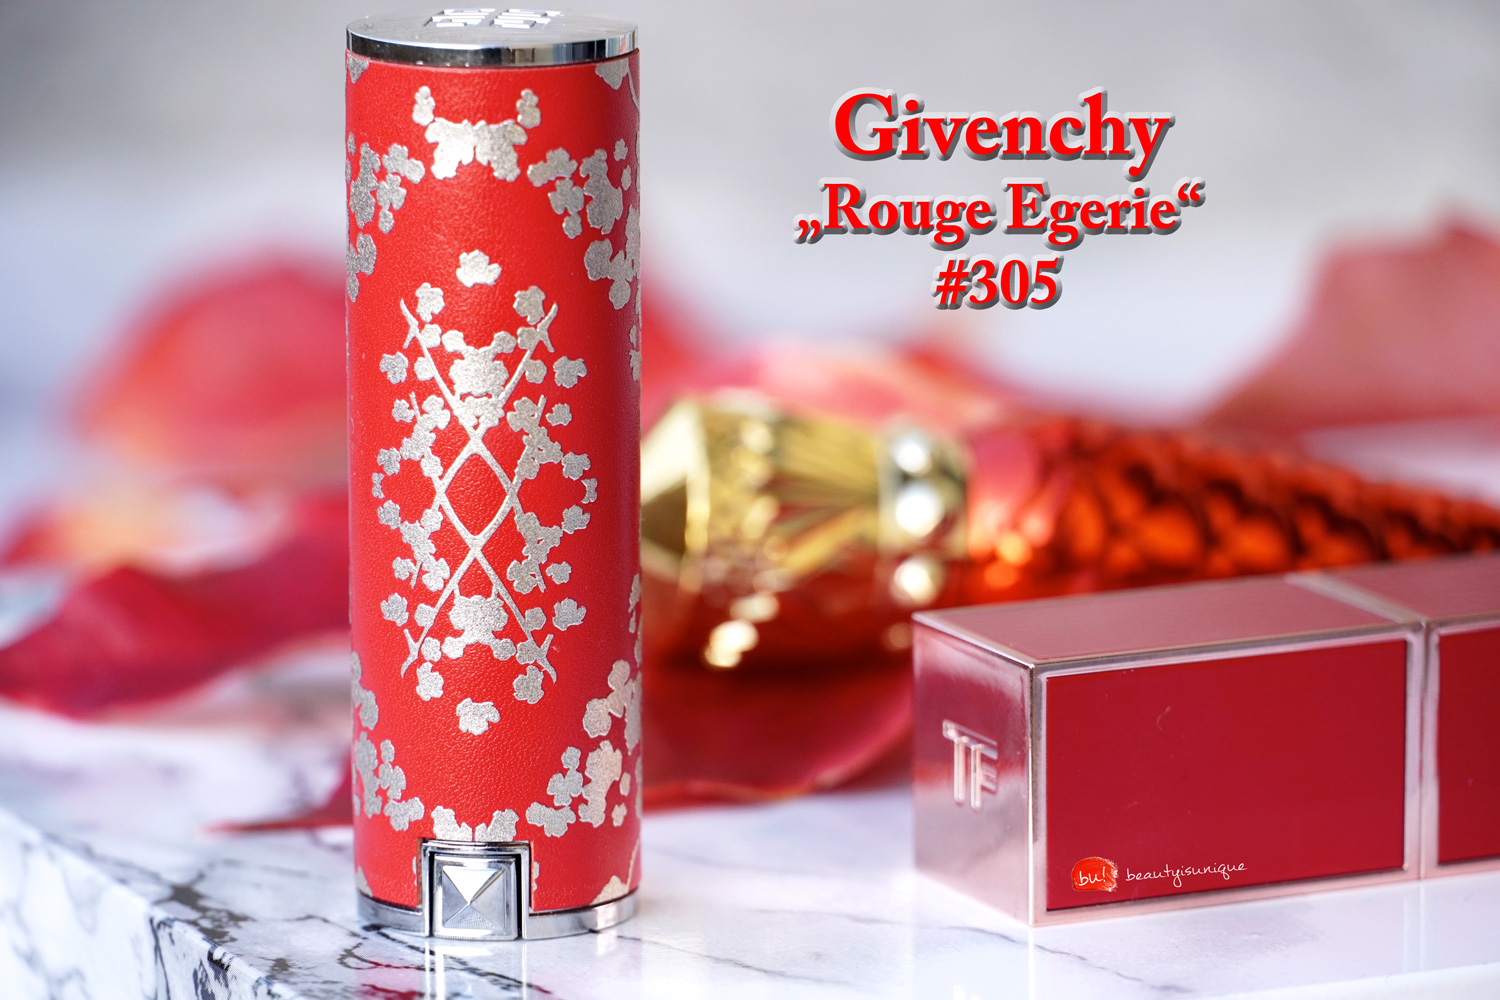 Givenchy-rouge-egerie-305